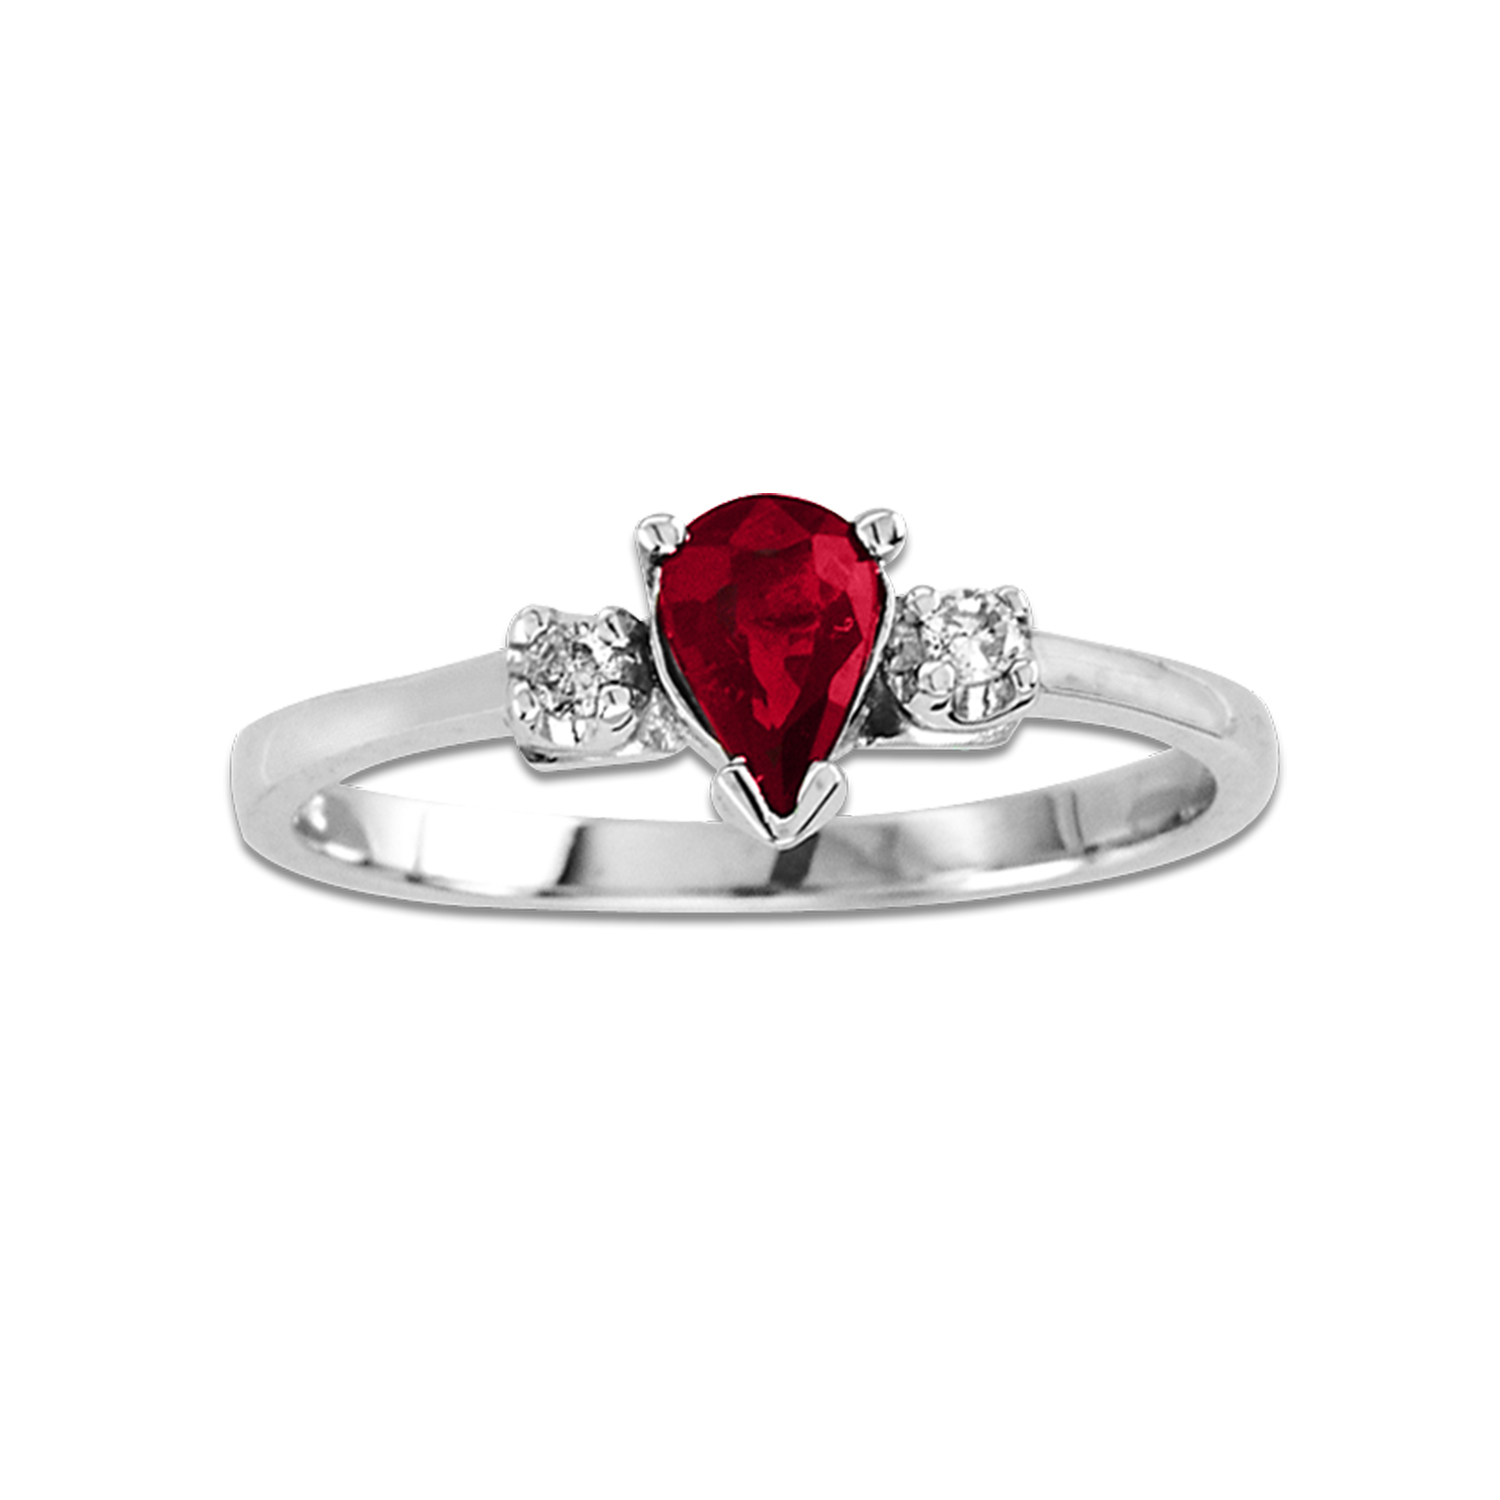 View 0.49cttw Diamond and Pear Shaped Natural Heated Ruby Ring set in 14k Gold